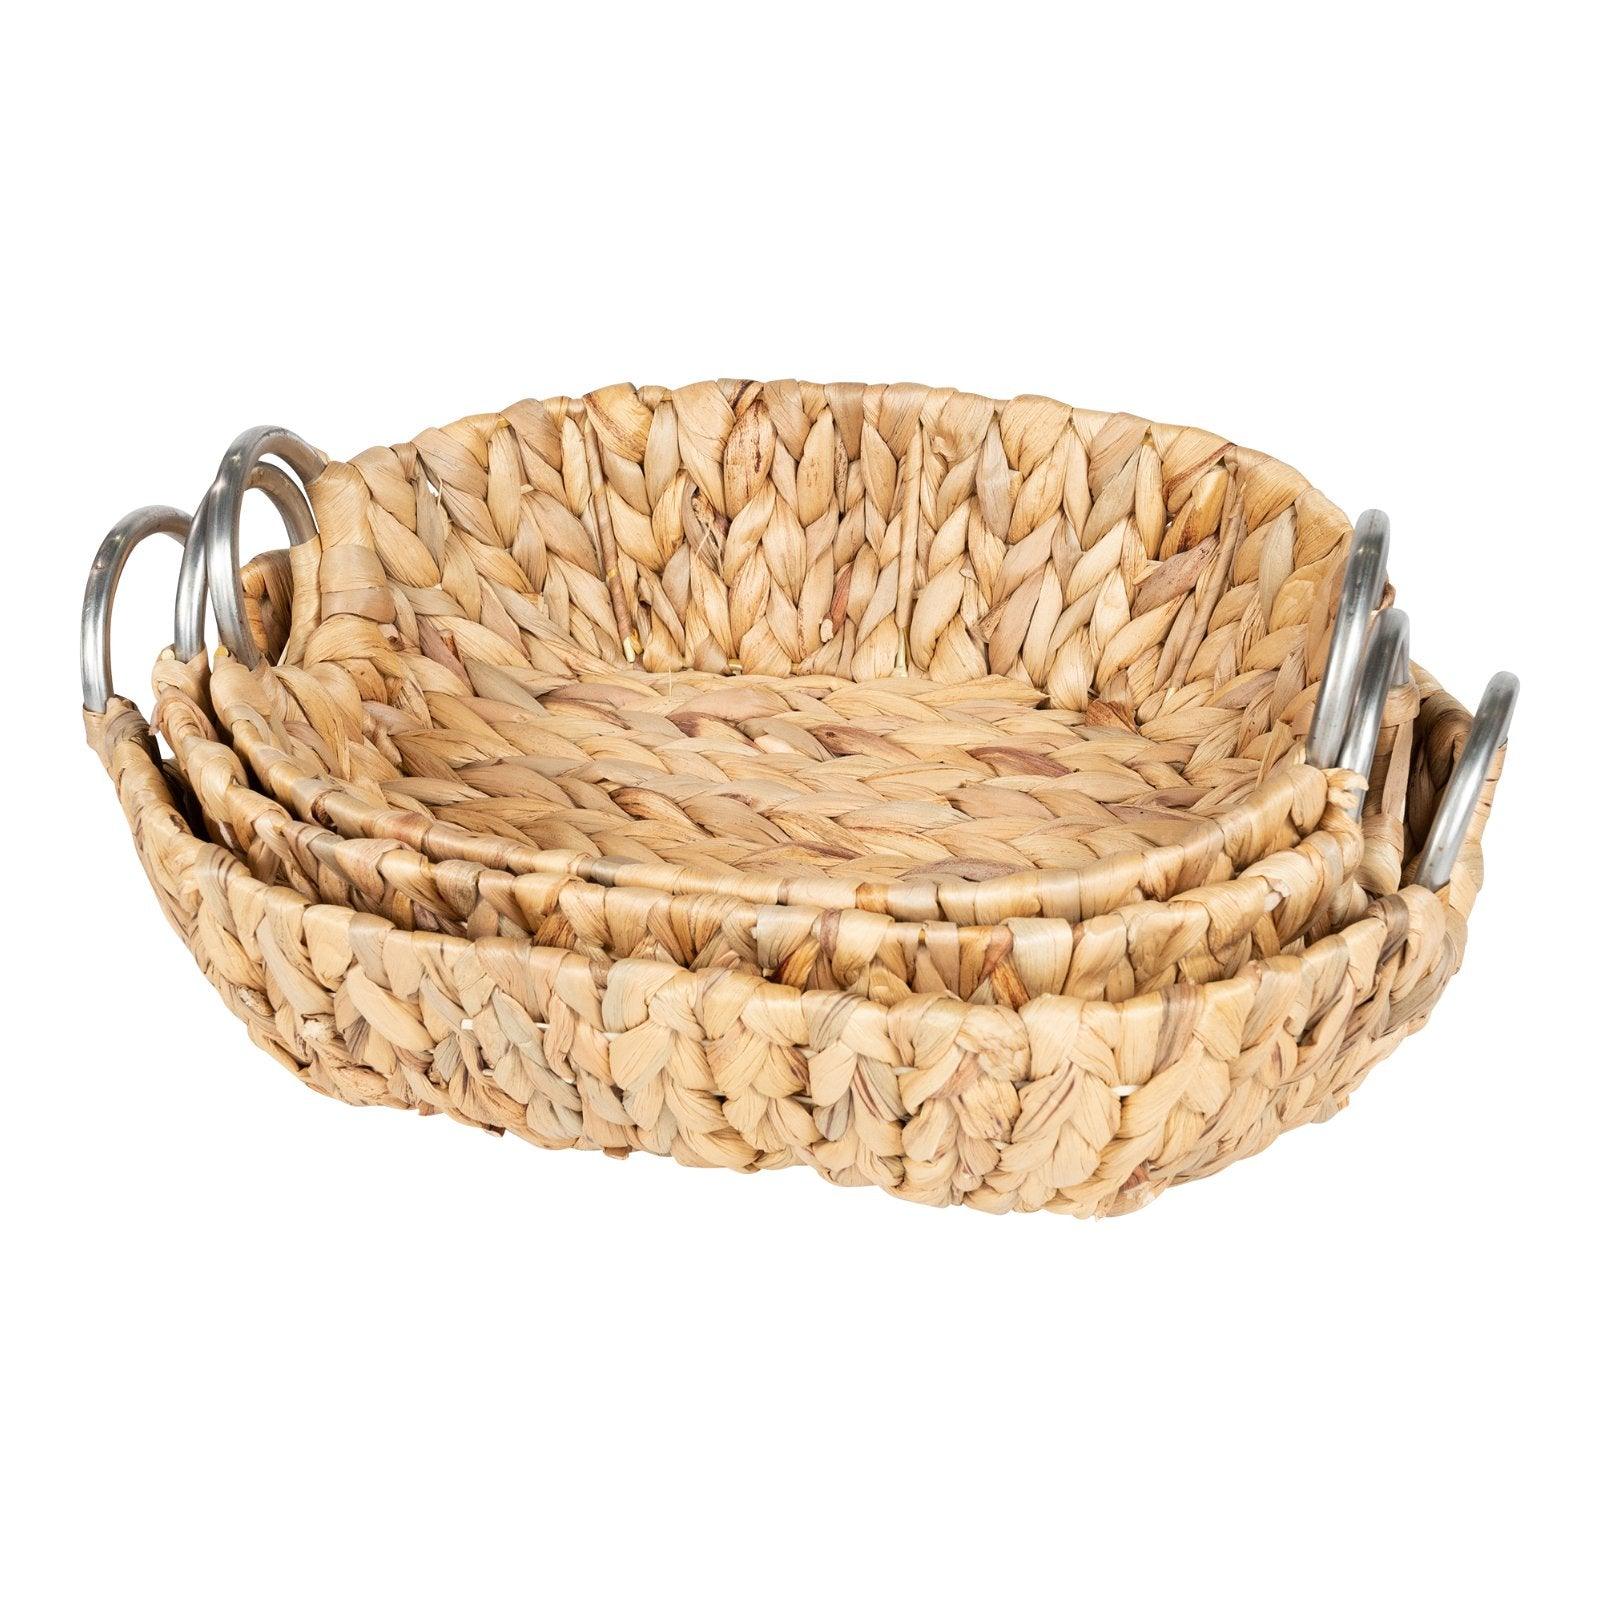 View Set of 3 Oval Raffia Natural Baskets With Metal Handles information